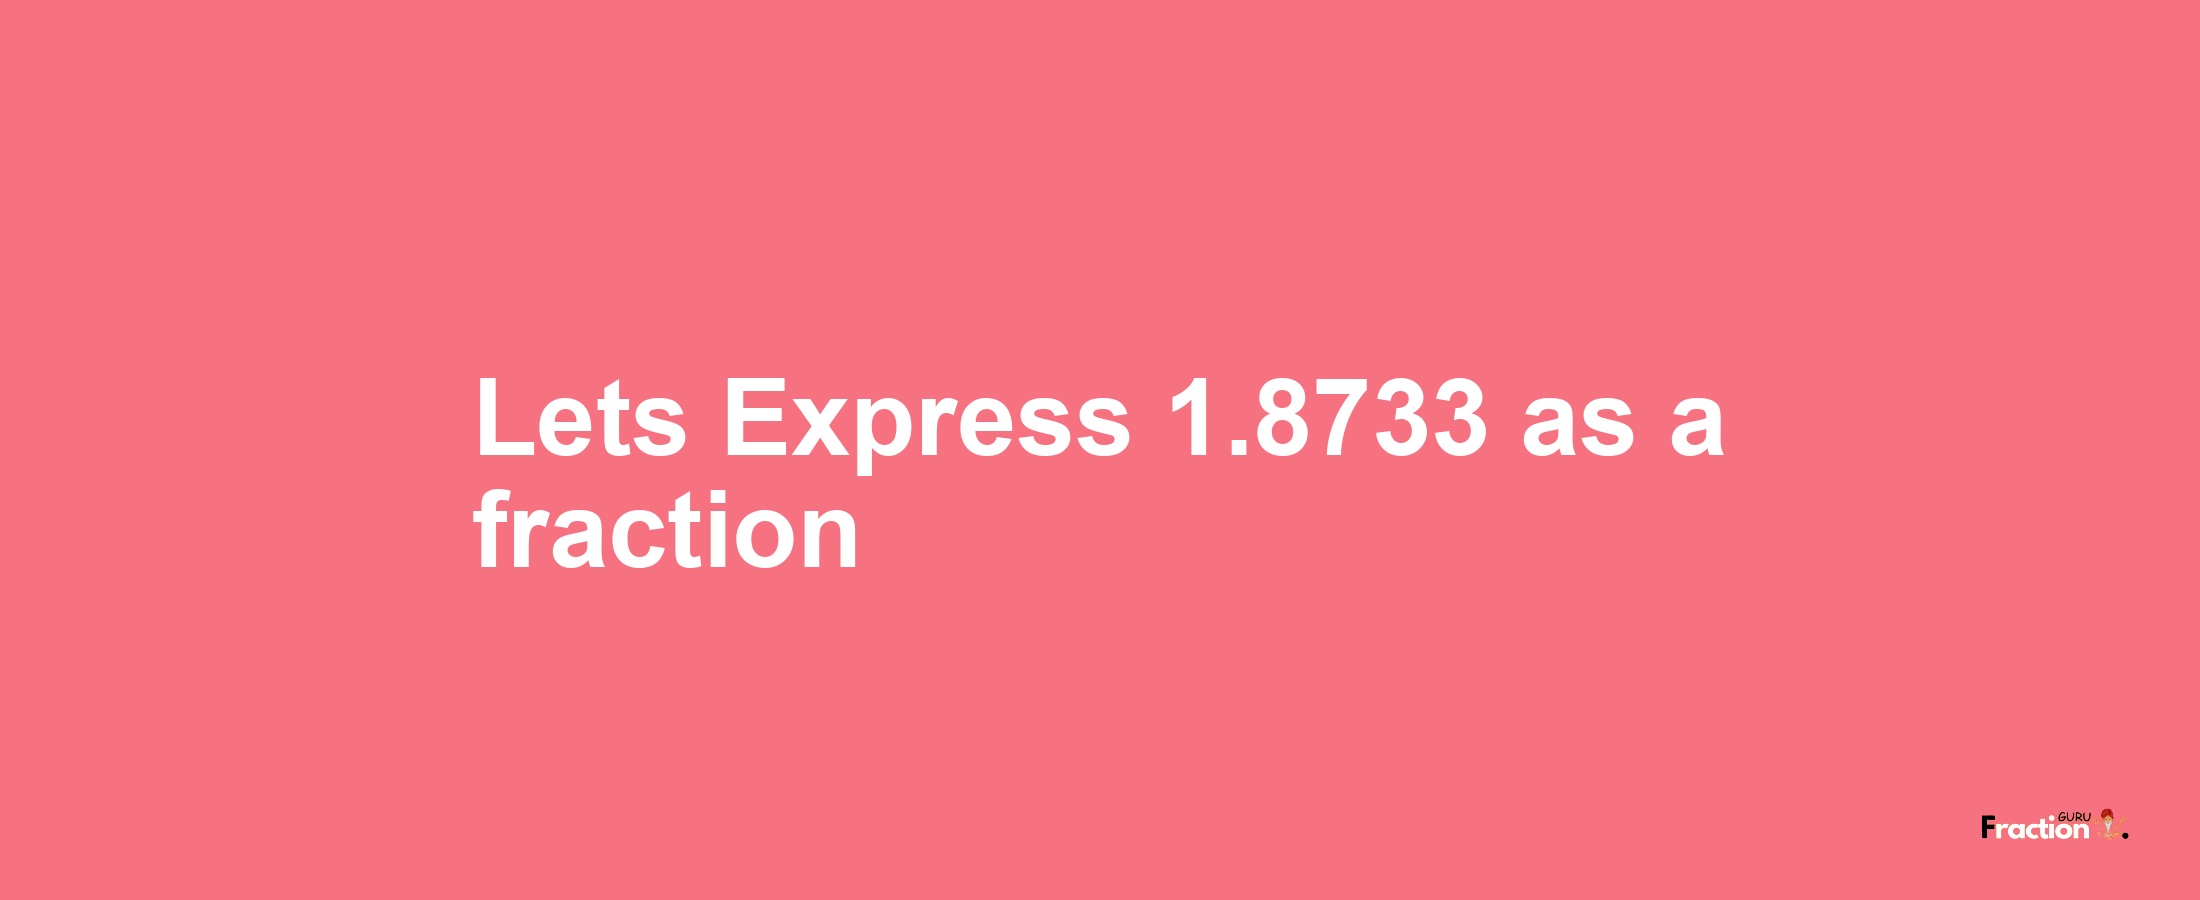 Lets Express 1.8733 as afraction